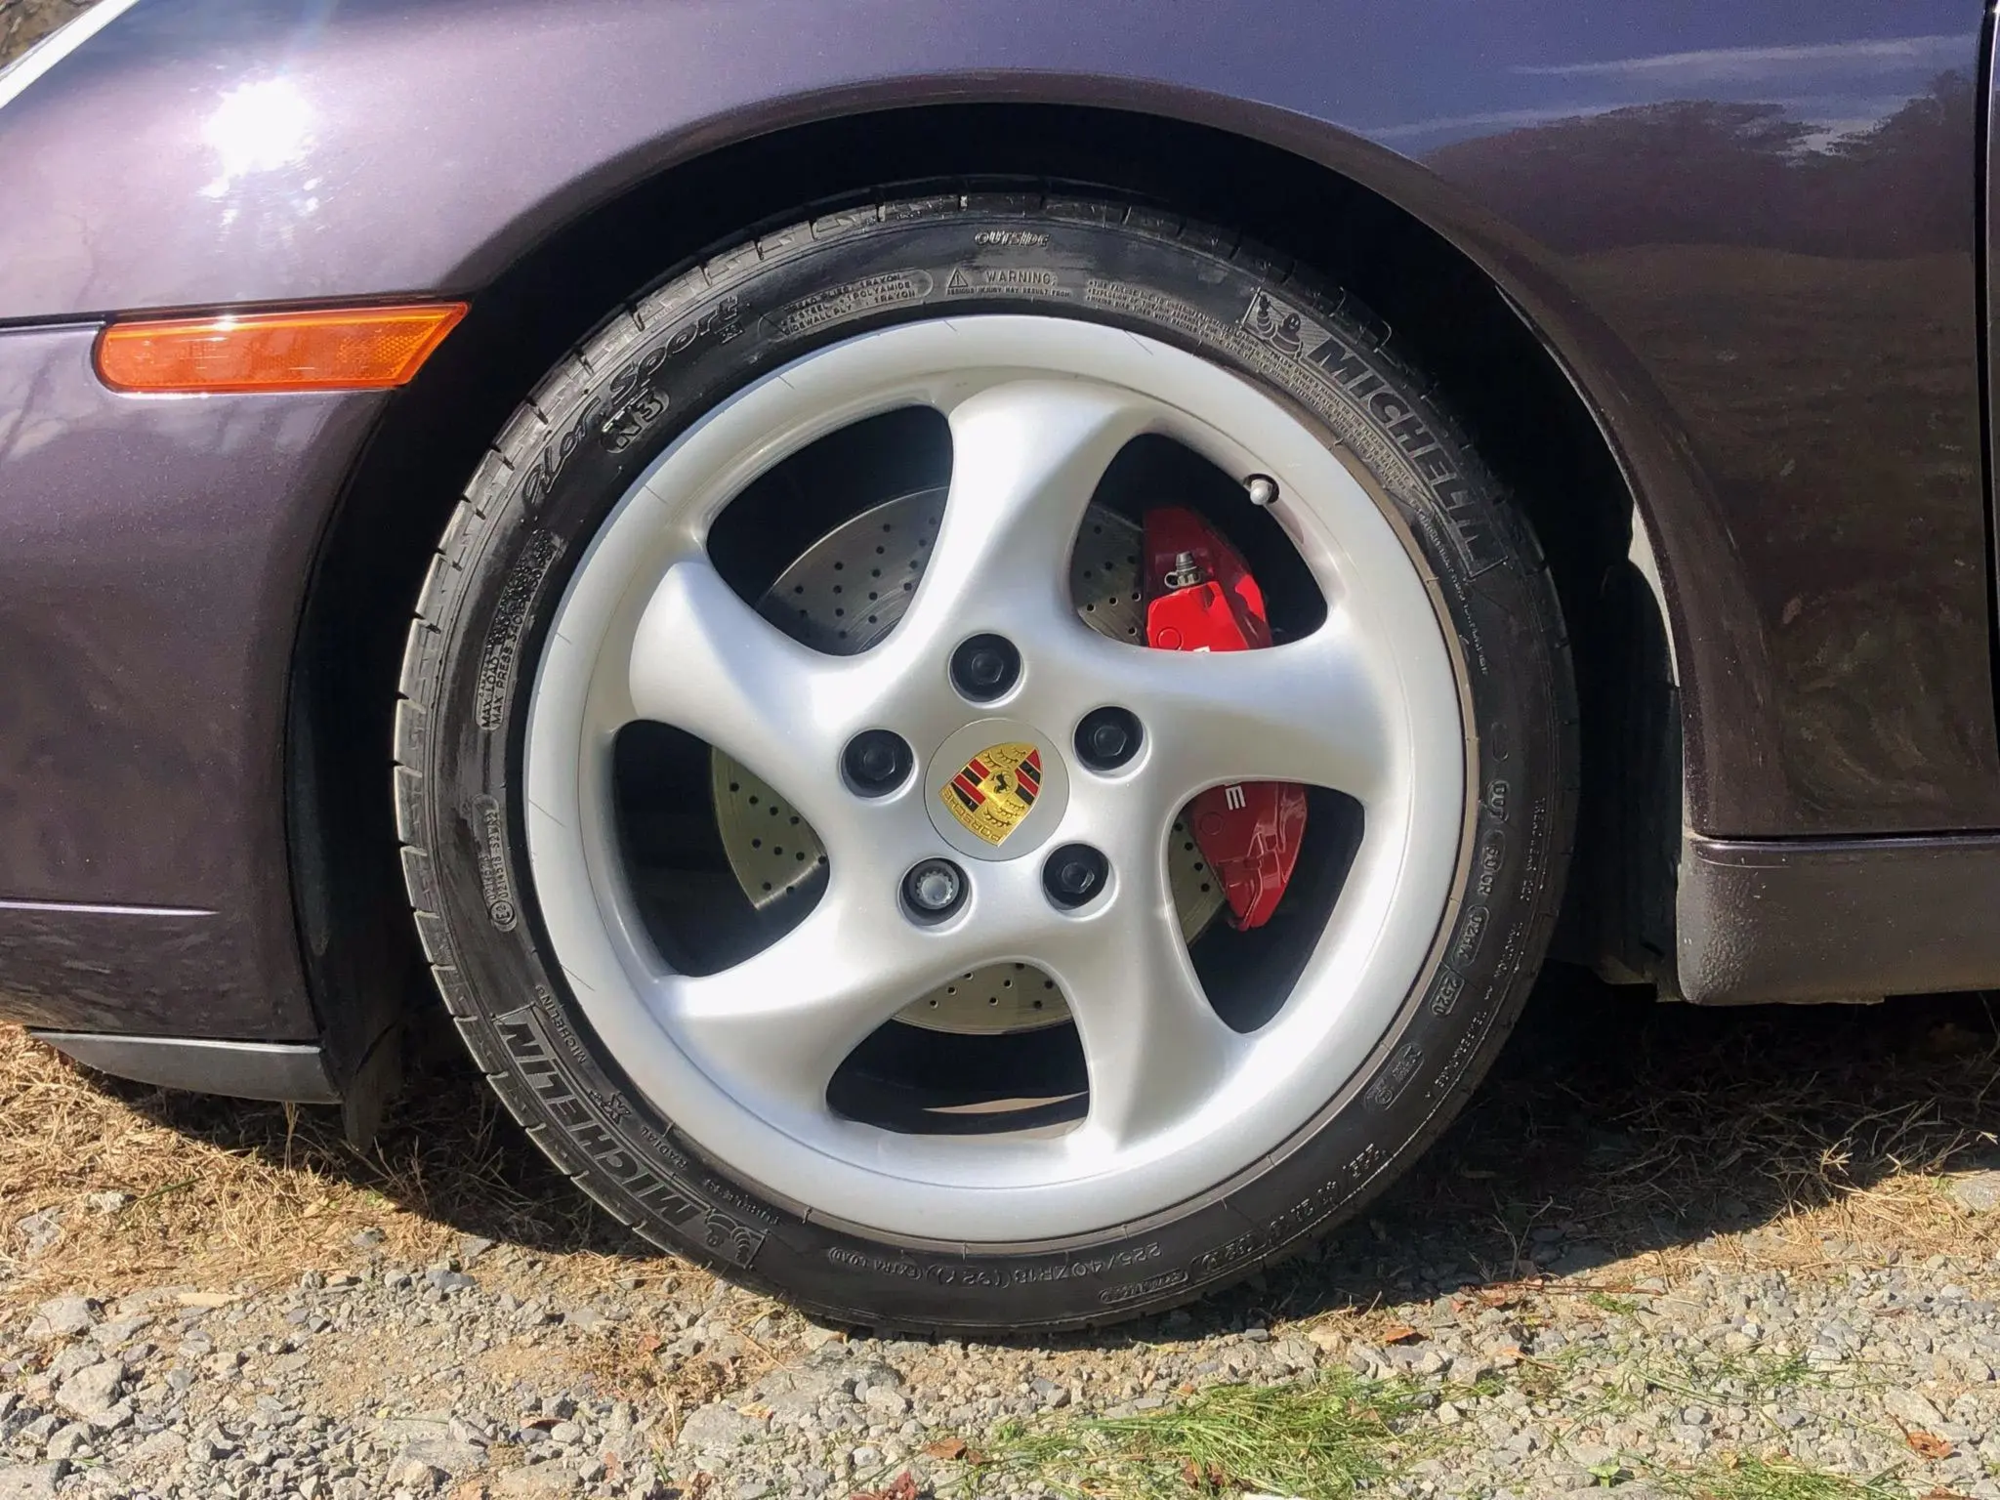 1999 Porsche 911 -  - Used - VIN WP0AA2993XS623514 - 76,200 Miles - 6 cyl - 2WD - Manual - Coupe - Purple - Delaplane, VA 20144, United States